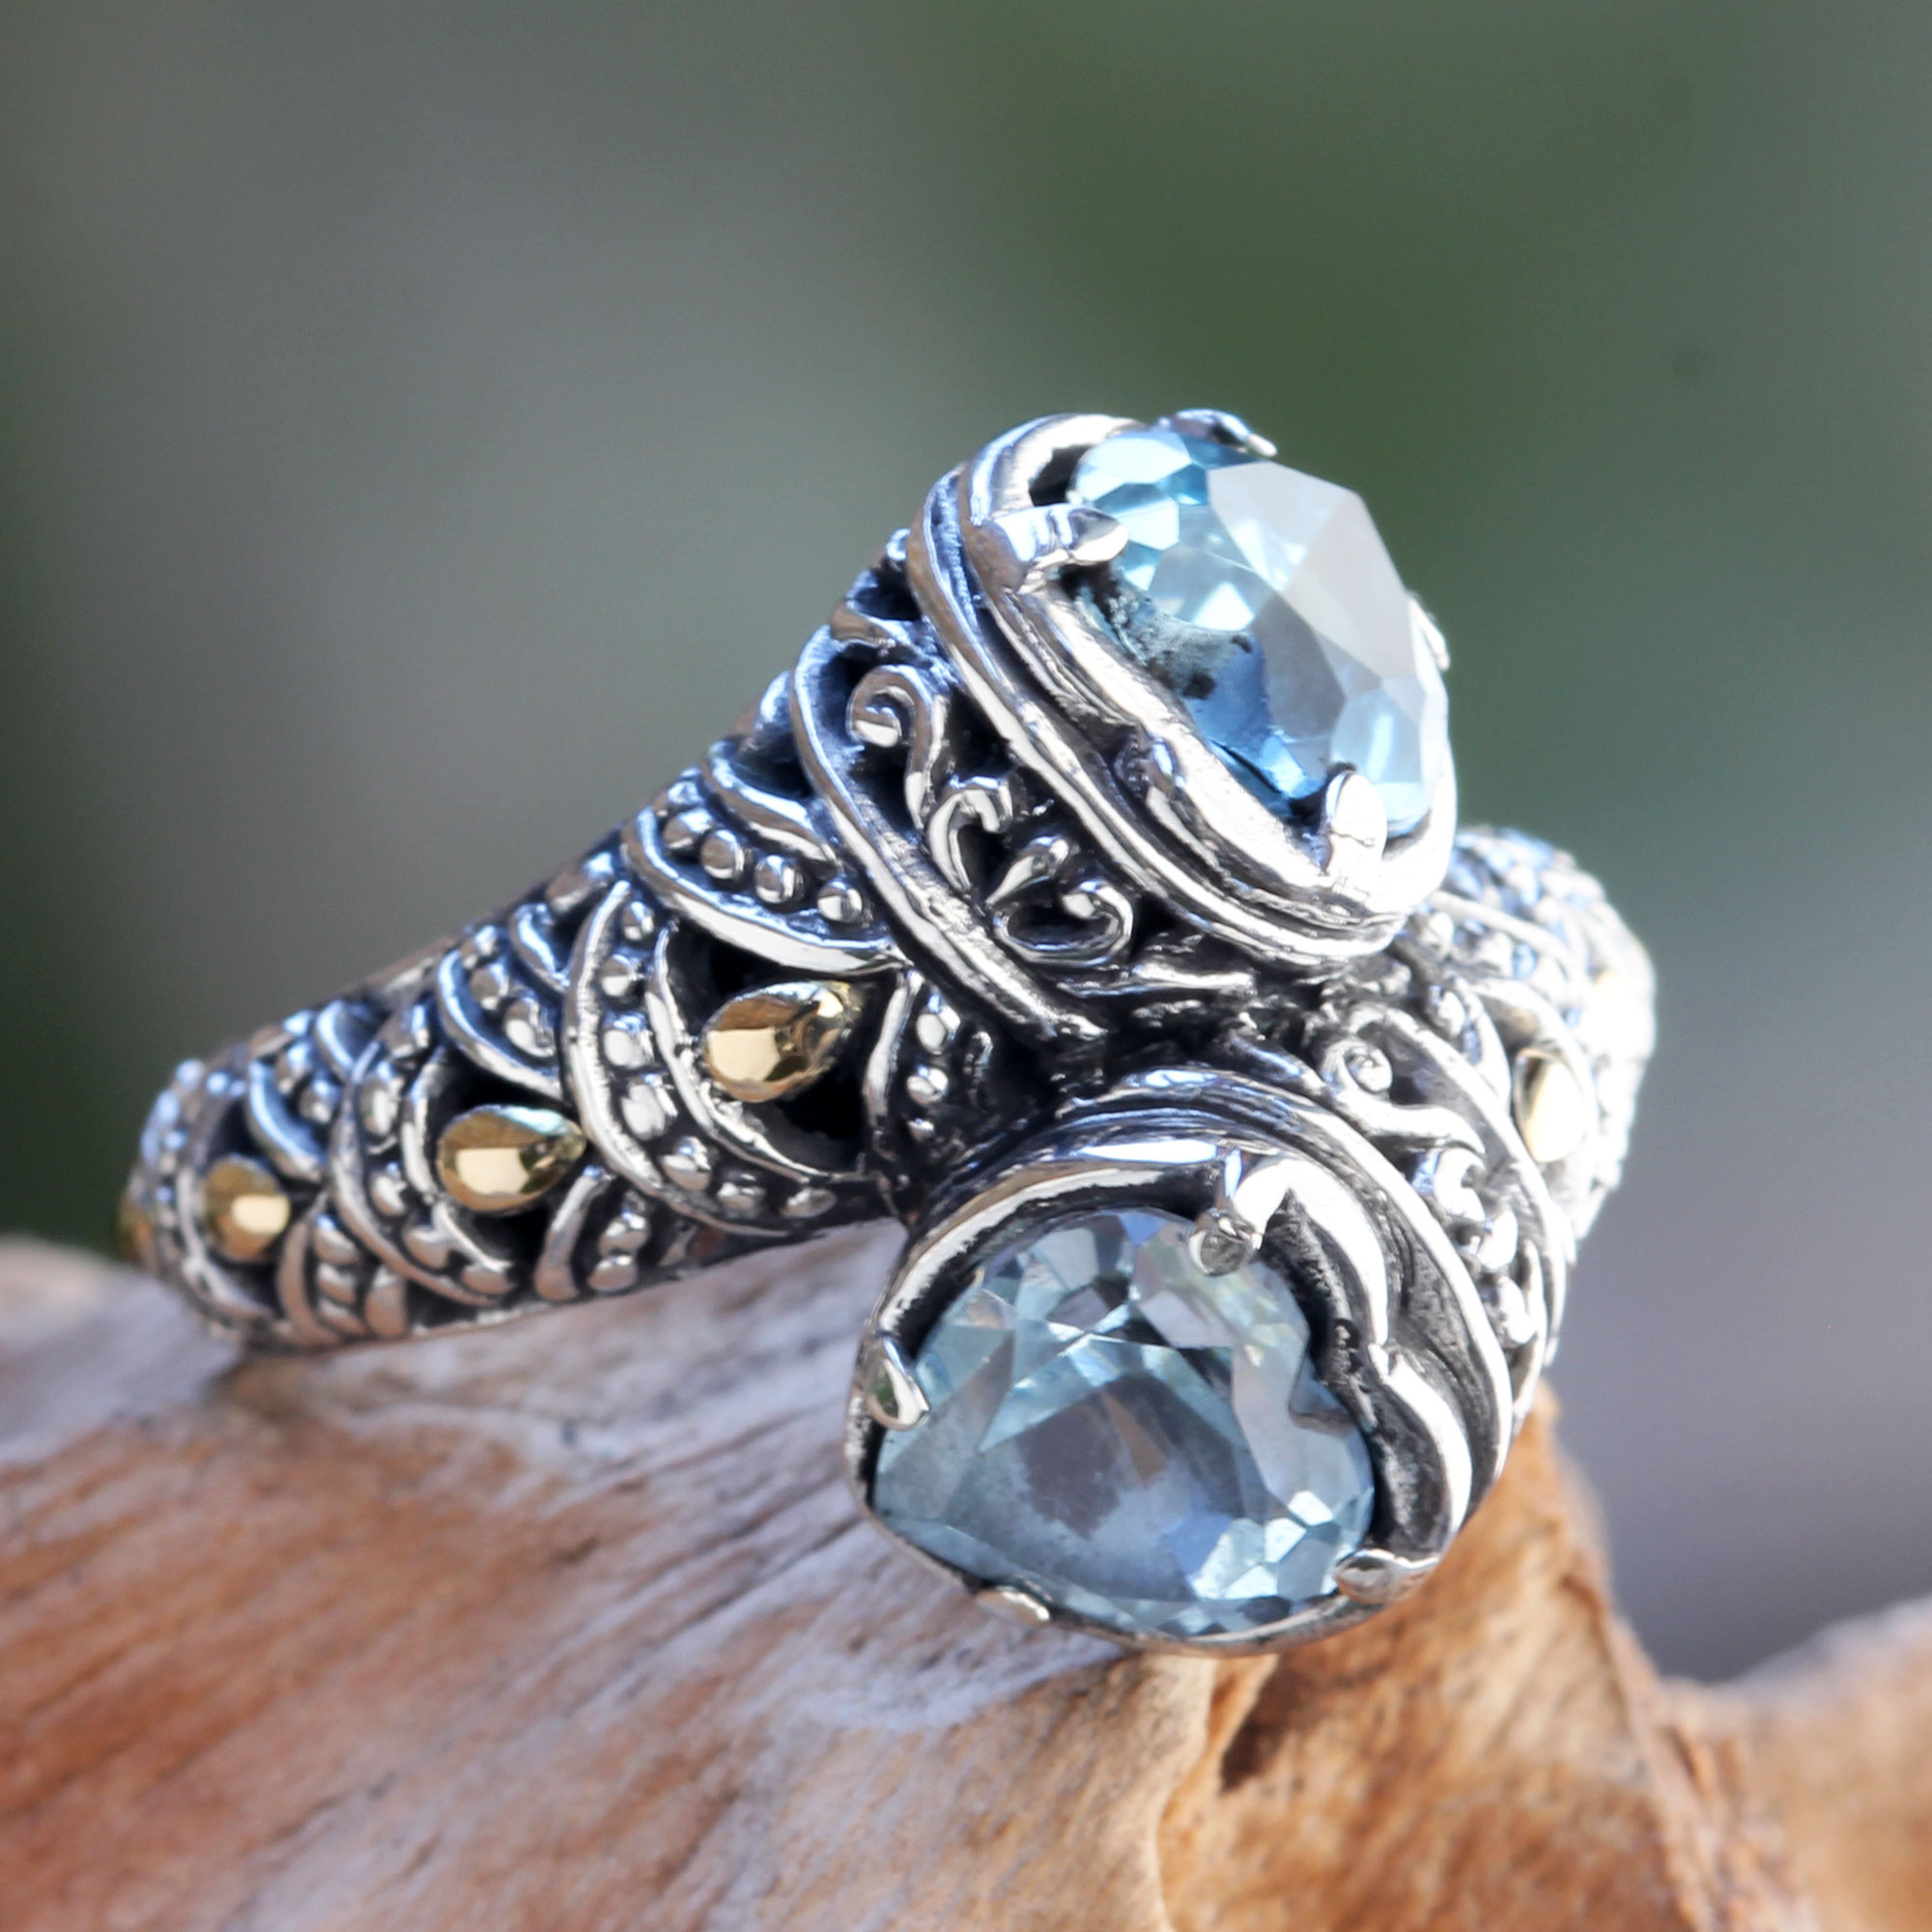 Blue Topaz on Sterling Silver Ring with Gold Plated Accents - Romantic ...